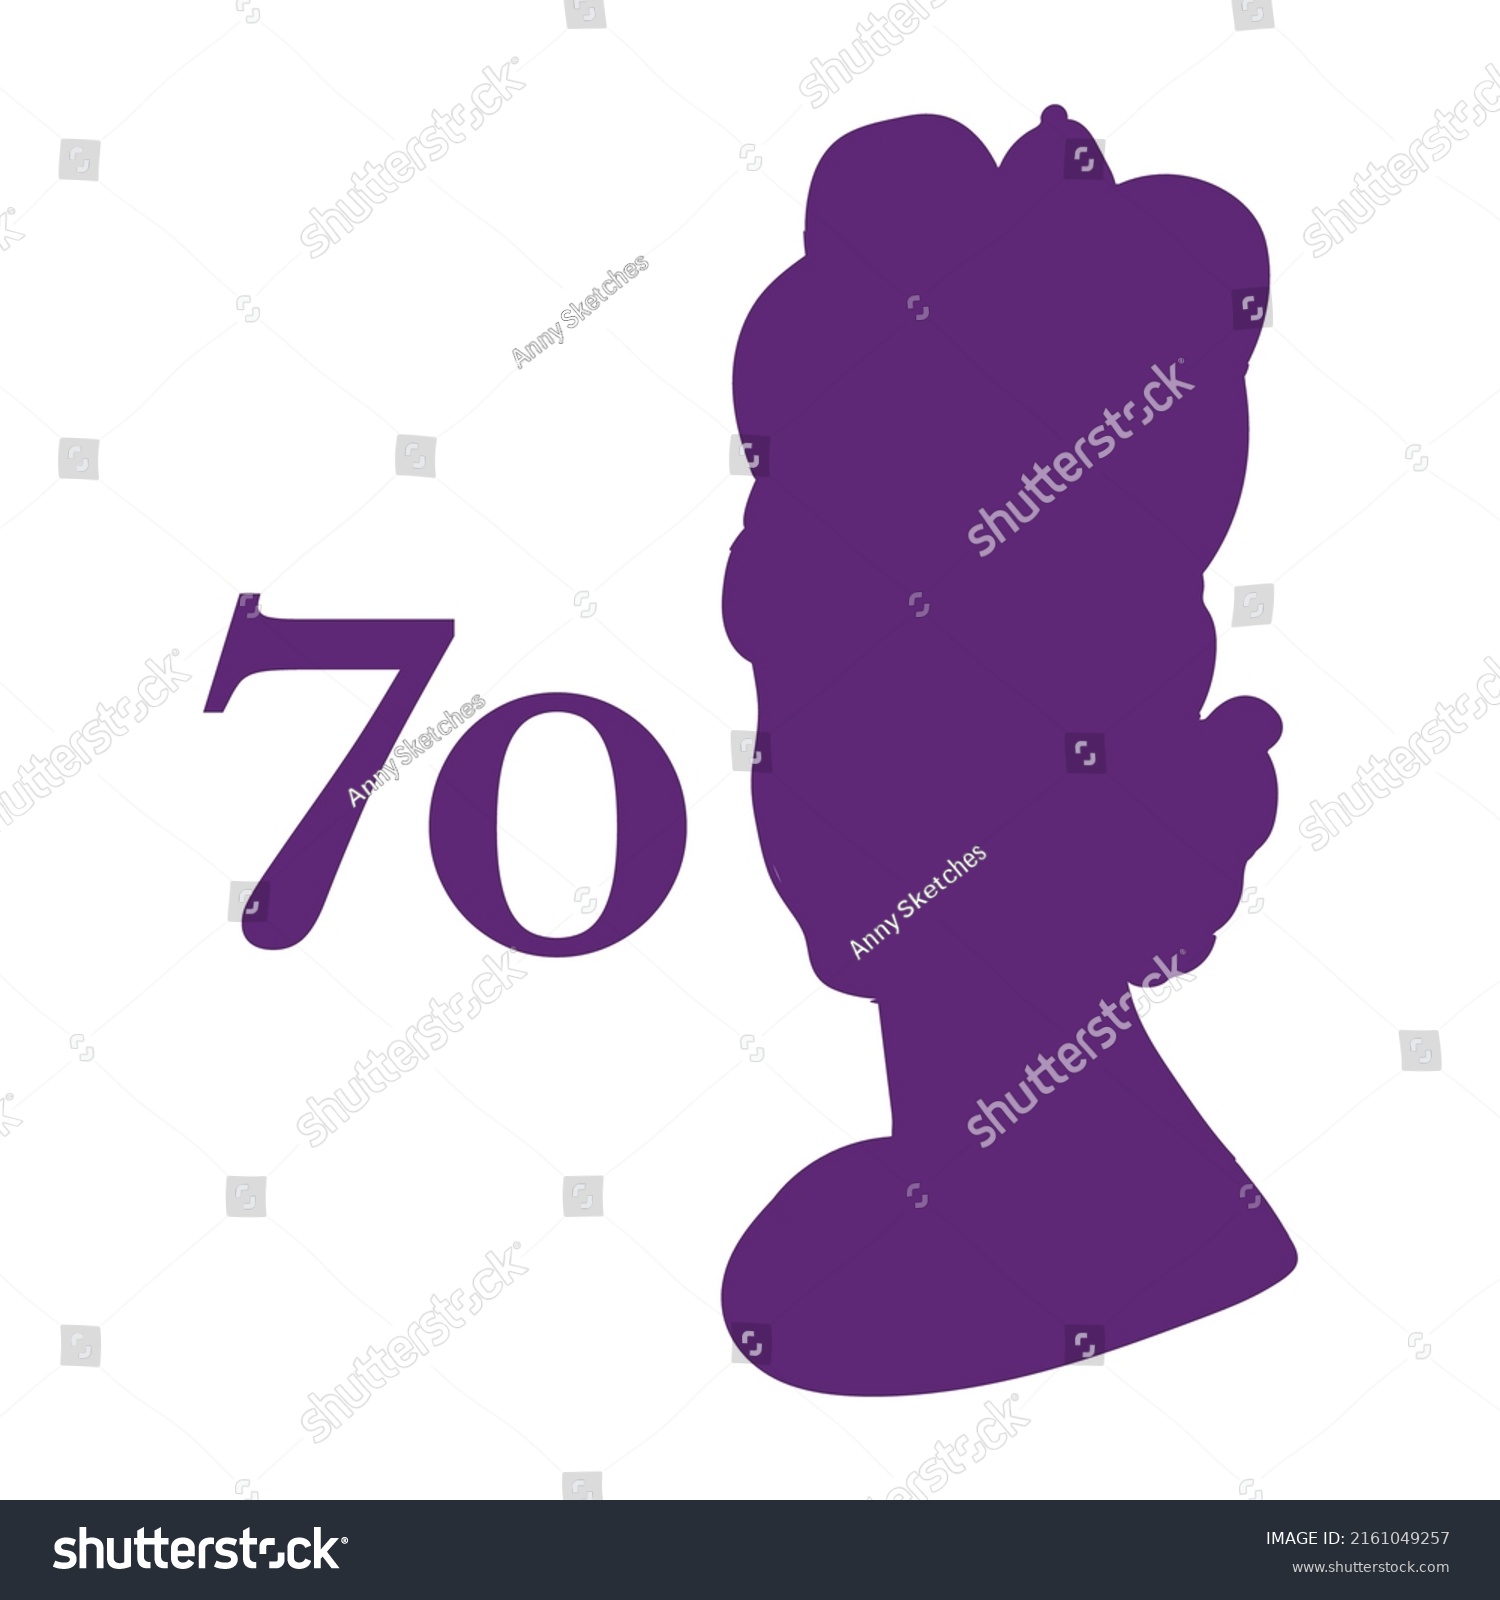 SVG of The Queen's Platinum Jubilee celebration poster with silhouette of Queen Elizabeth on flag background. Vector illustration for Her Majesty The Queen on her 70 years of service 1952 - 2022 svg